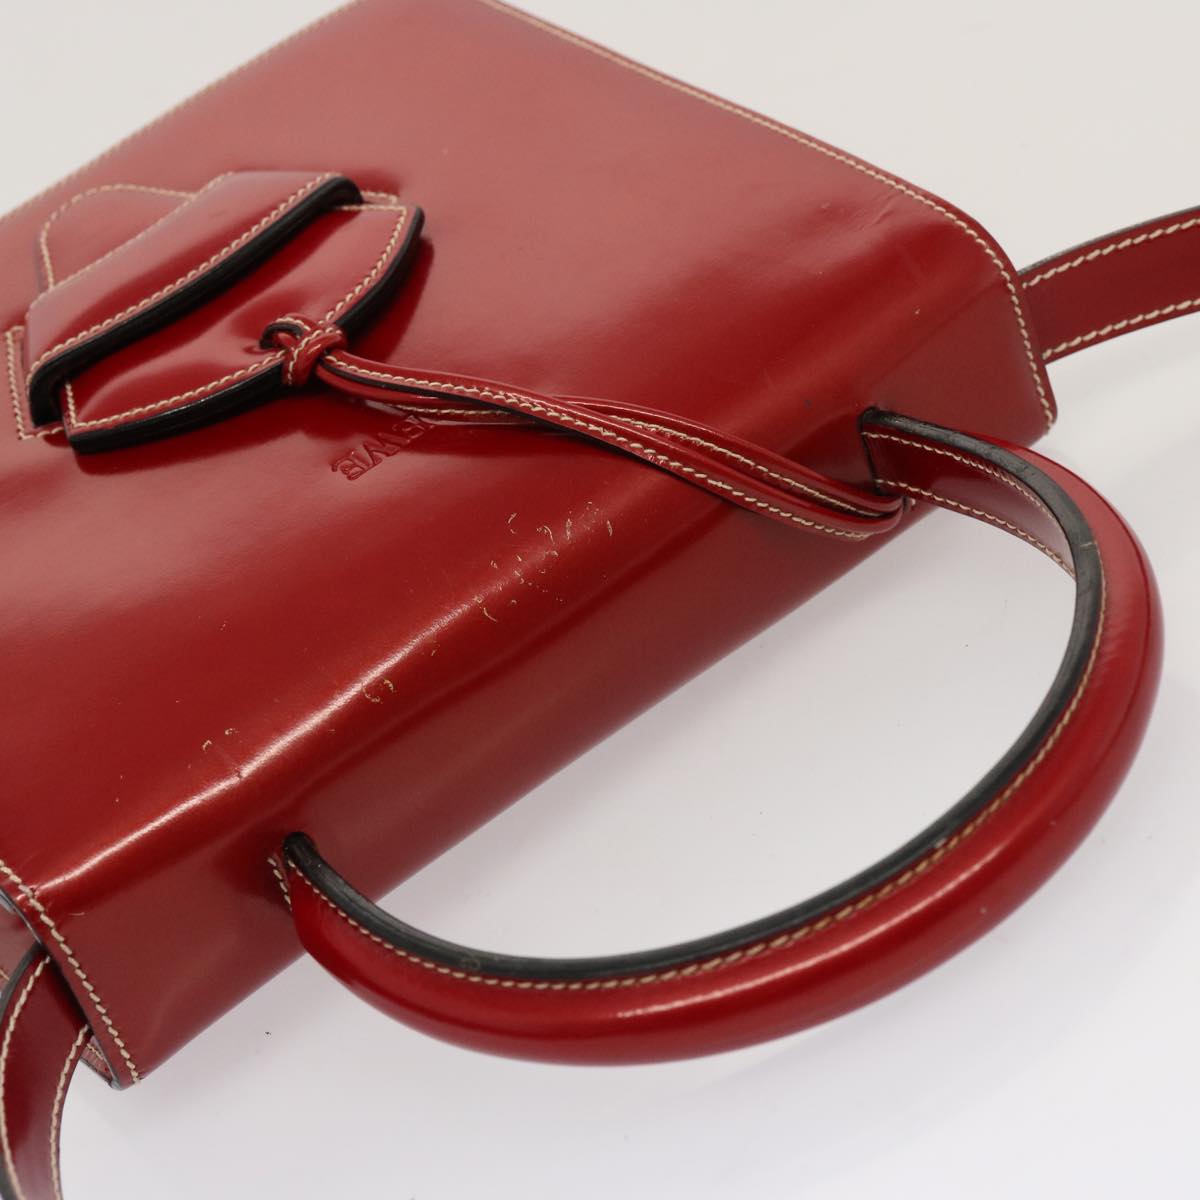 LOEWE Hand Bag Patent leather 2way Red Auth 69418